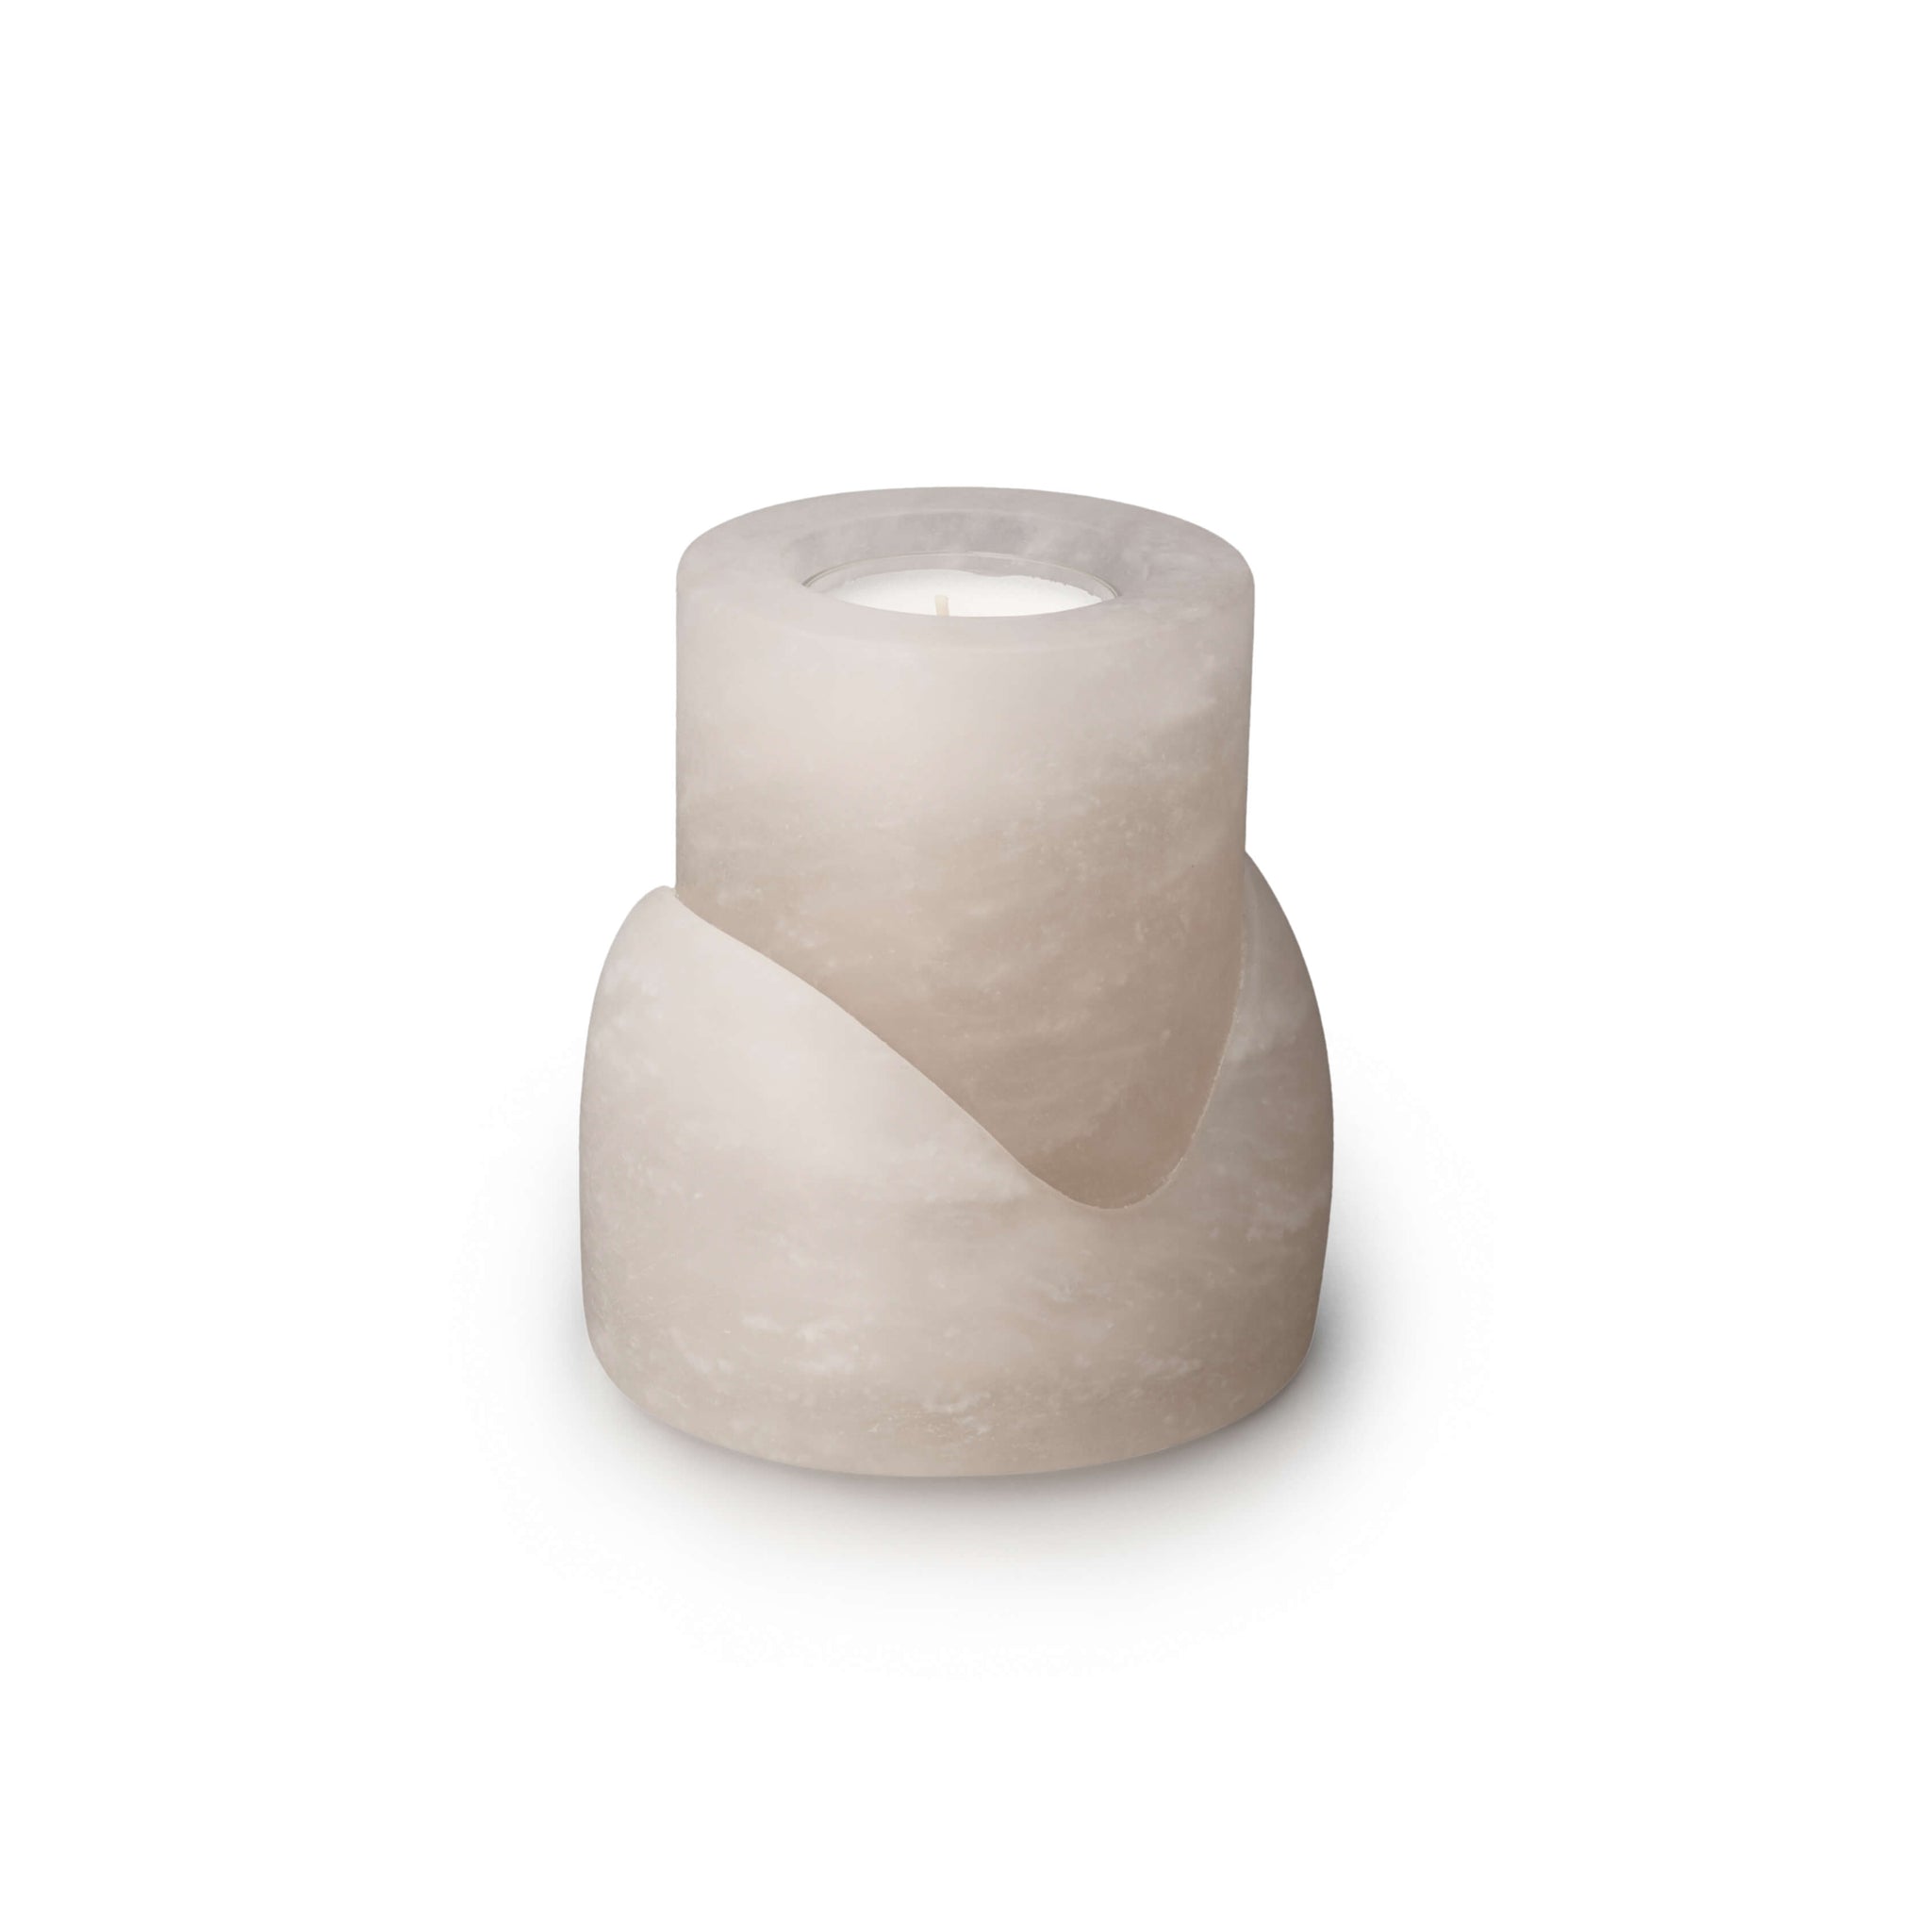 Manchester Tealight and Taper Candle Holder